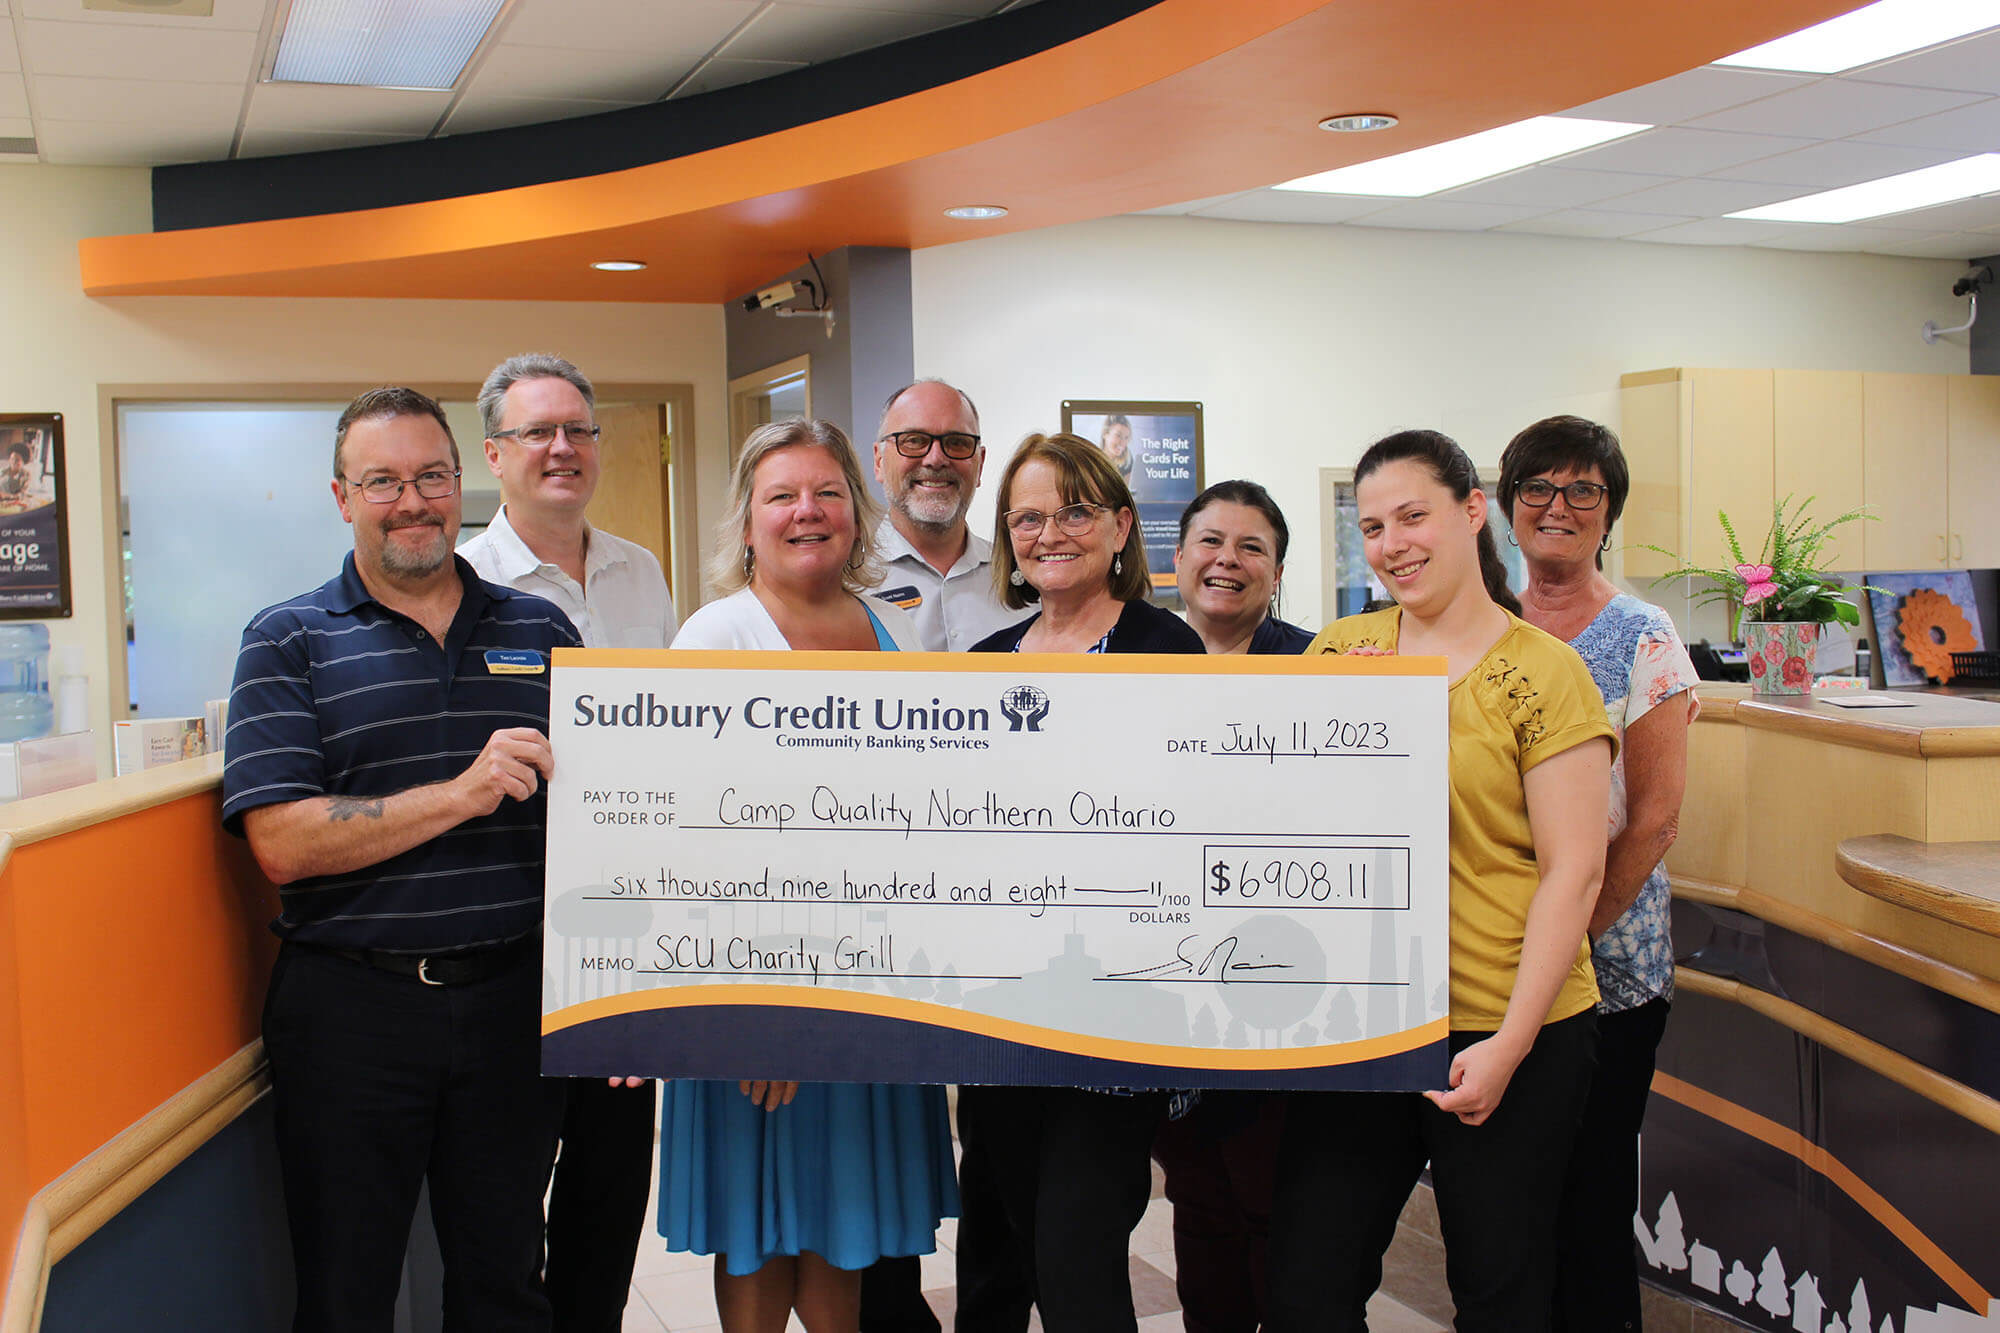 SCU staff present a cheque to Camp Quality Northern Ontario for $6908.11